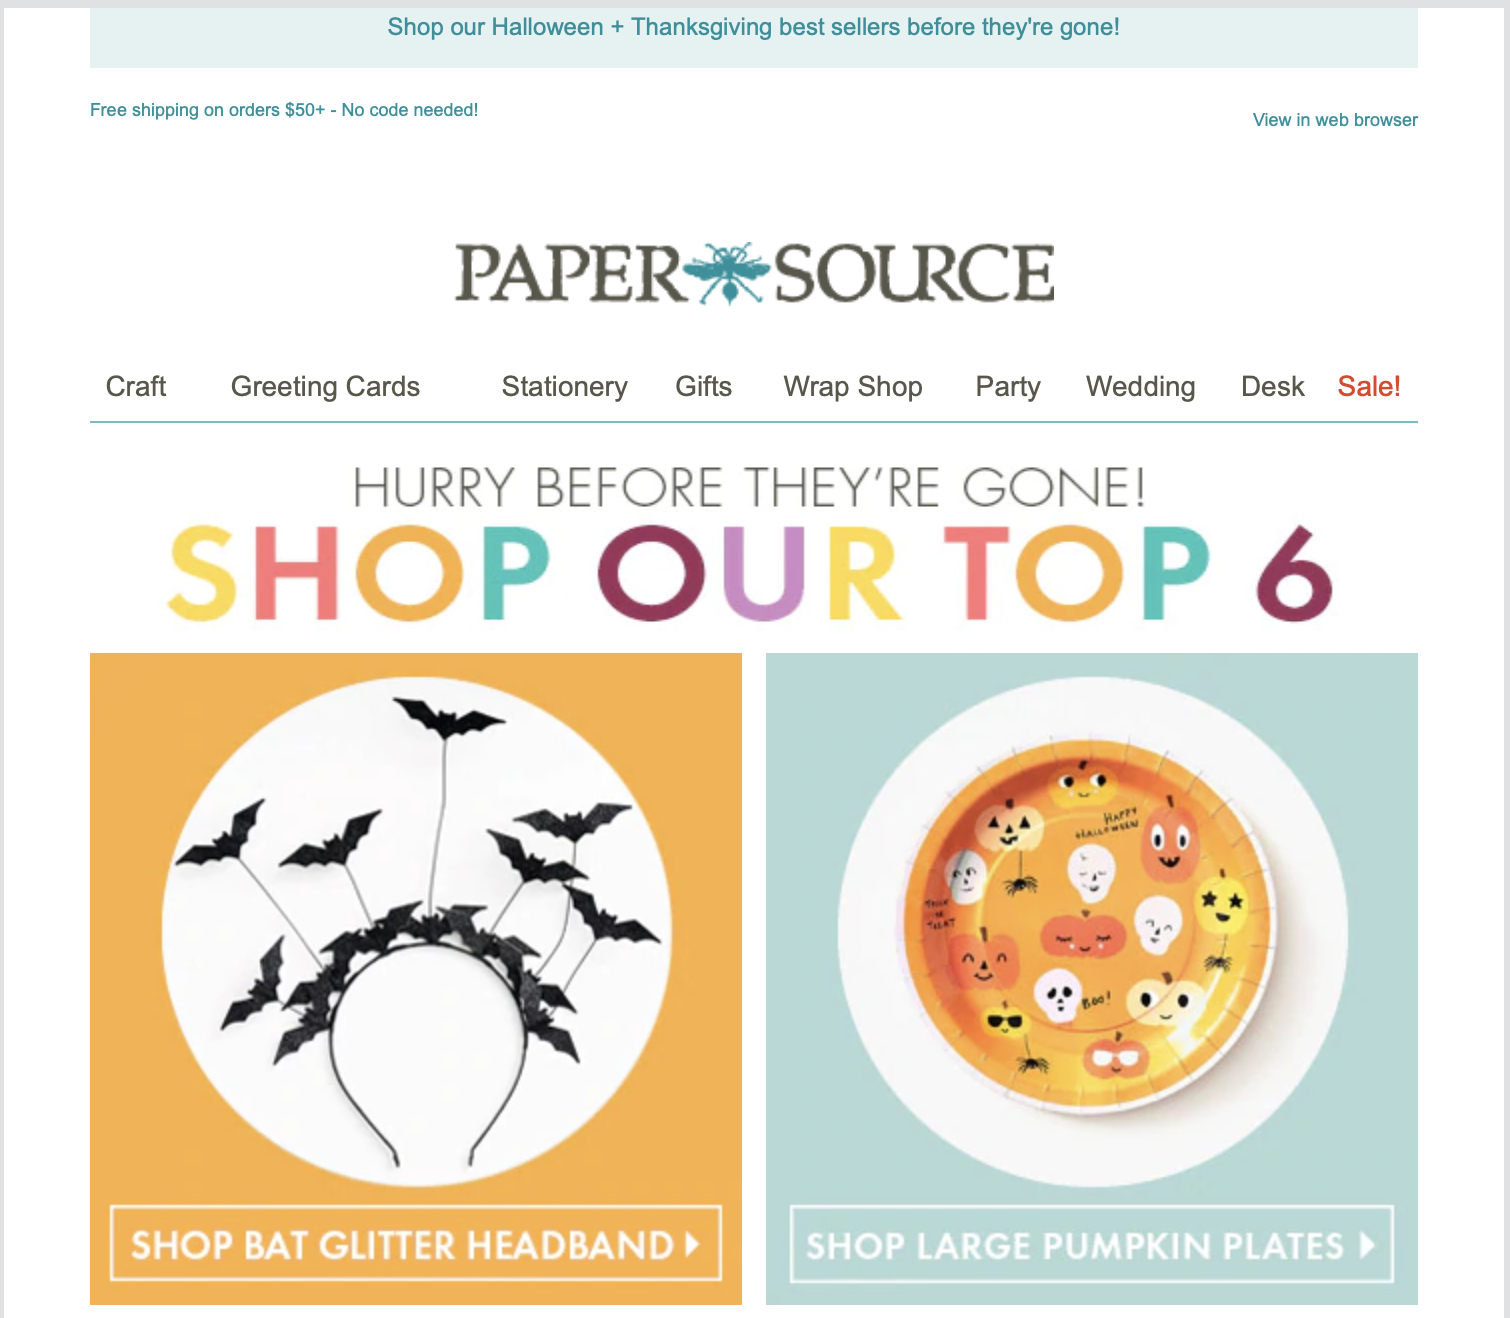 Promotional email from Paper Source